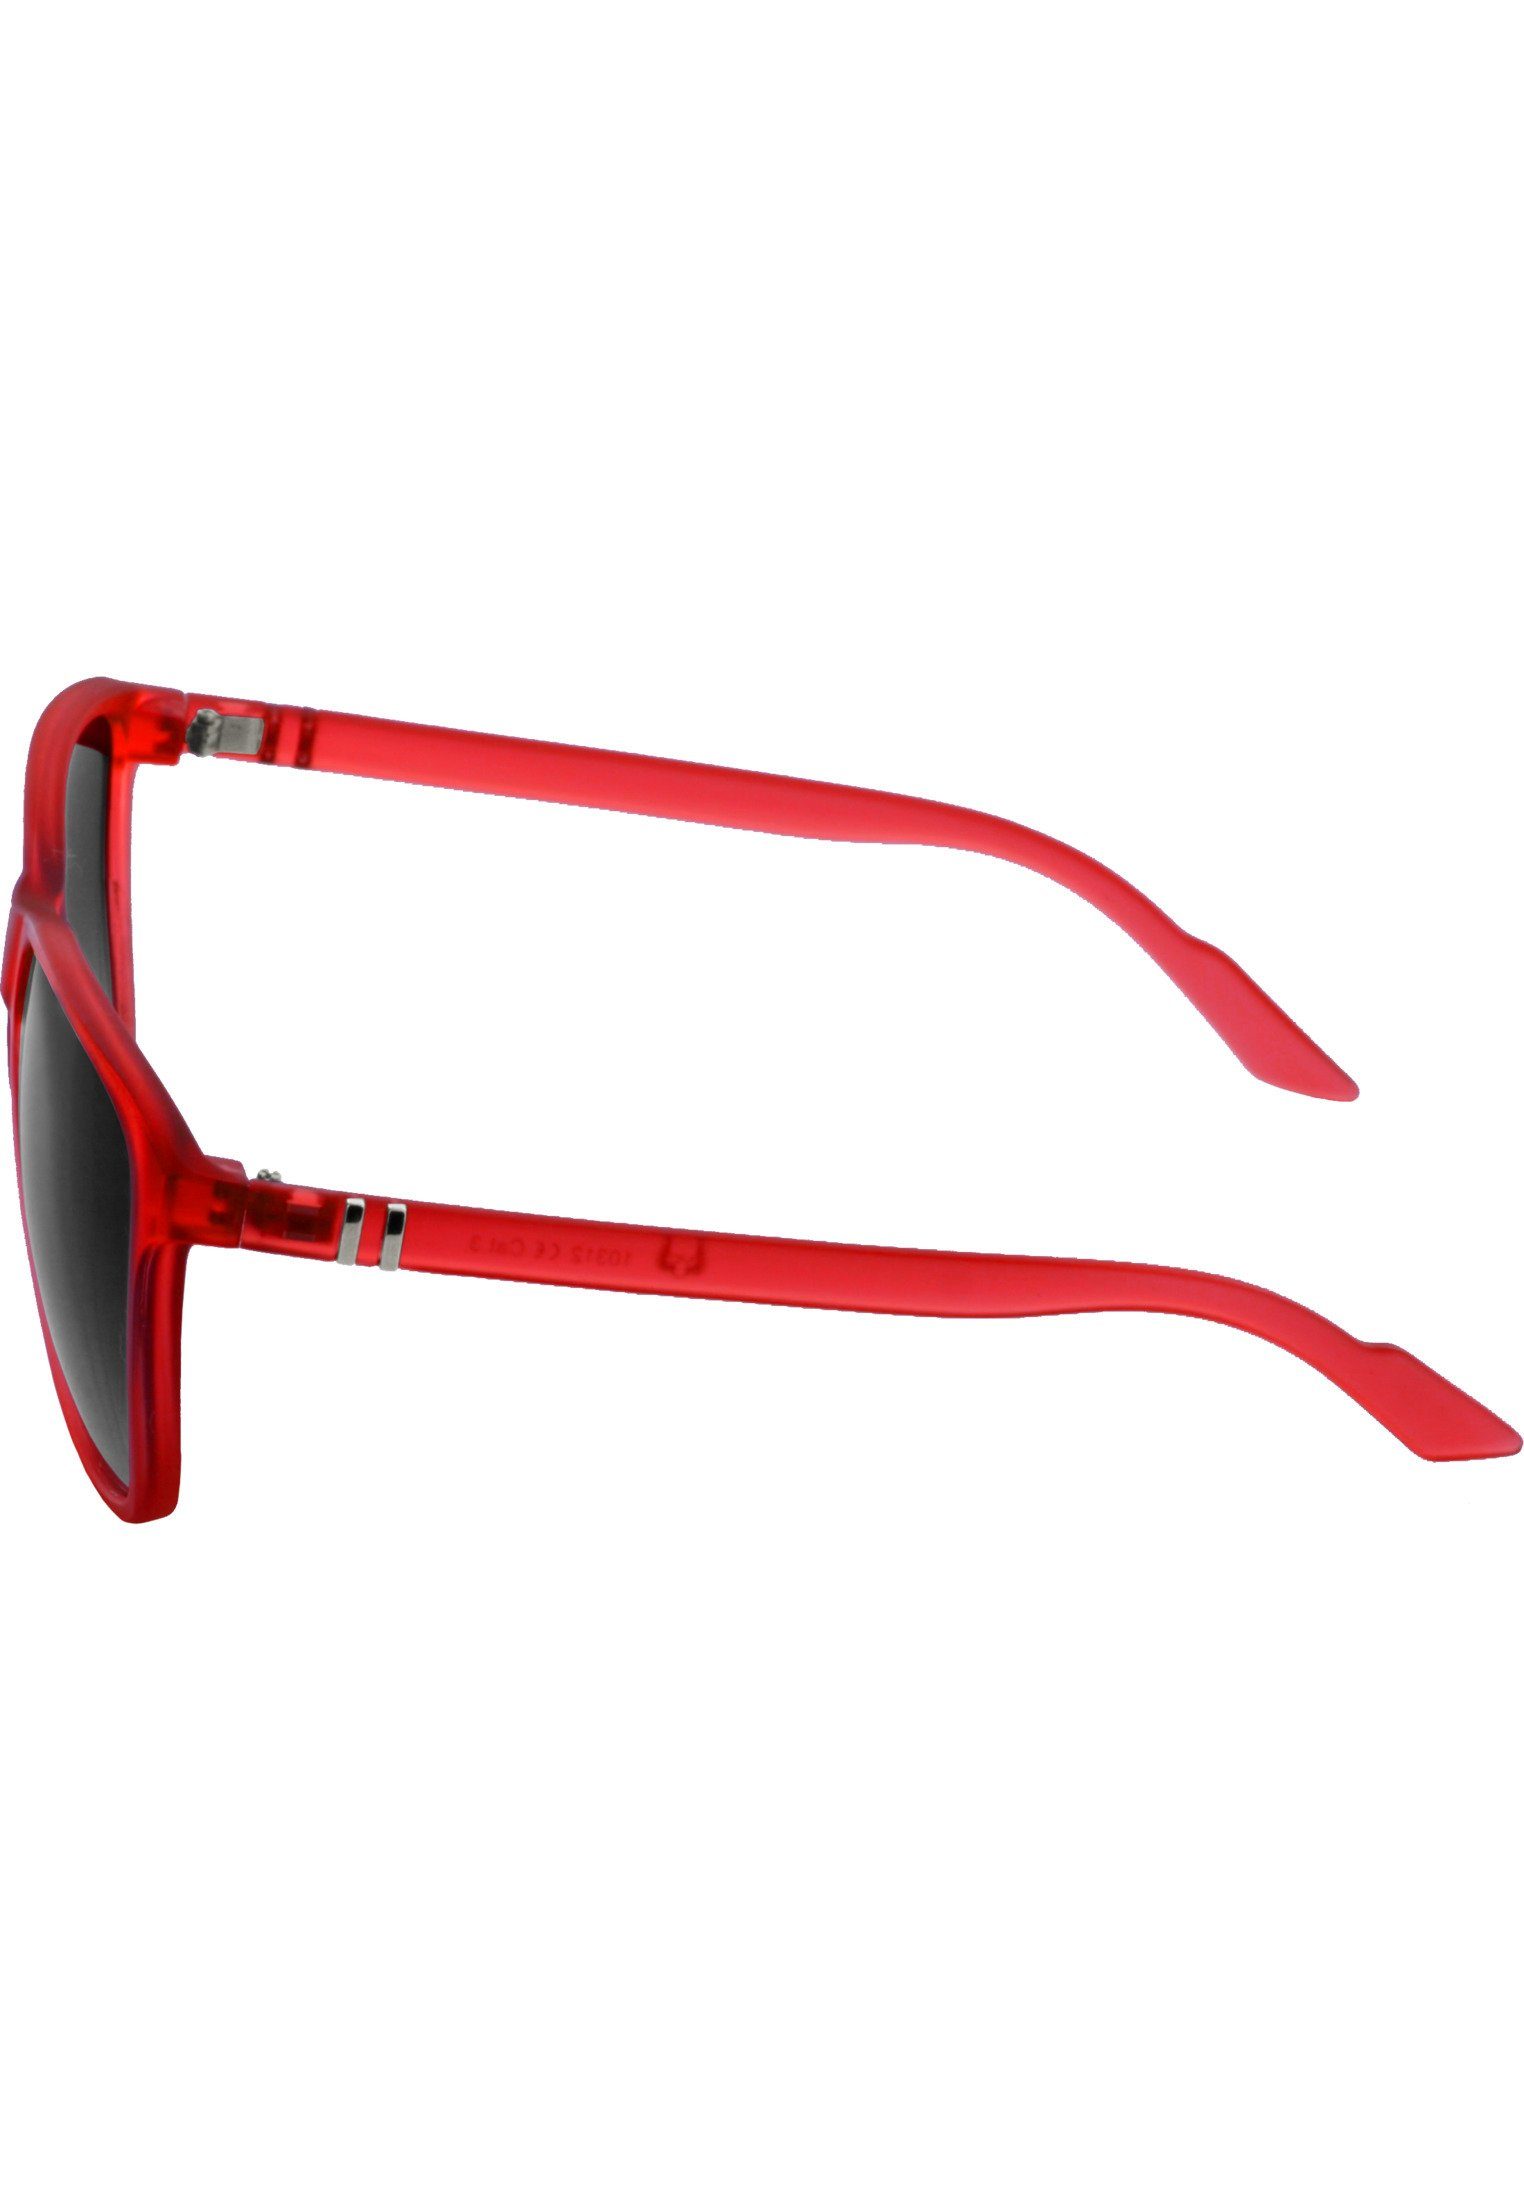 Sonnenbrille Chirwa Sunglasses red Accessoires MSTRDS